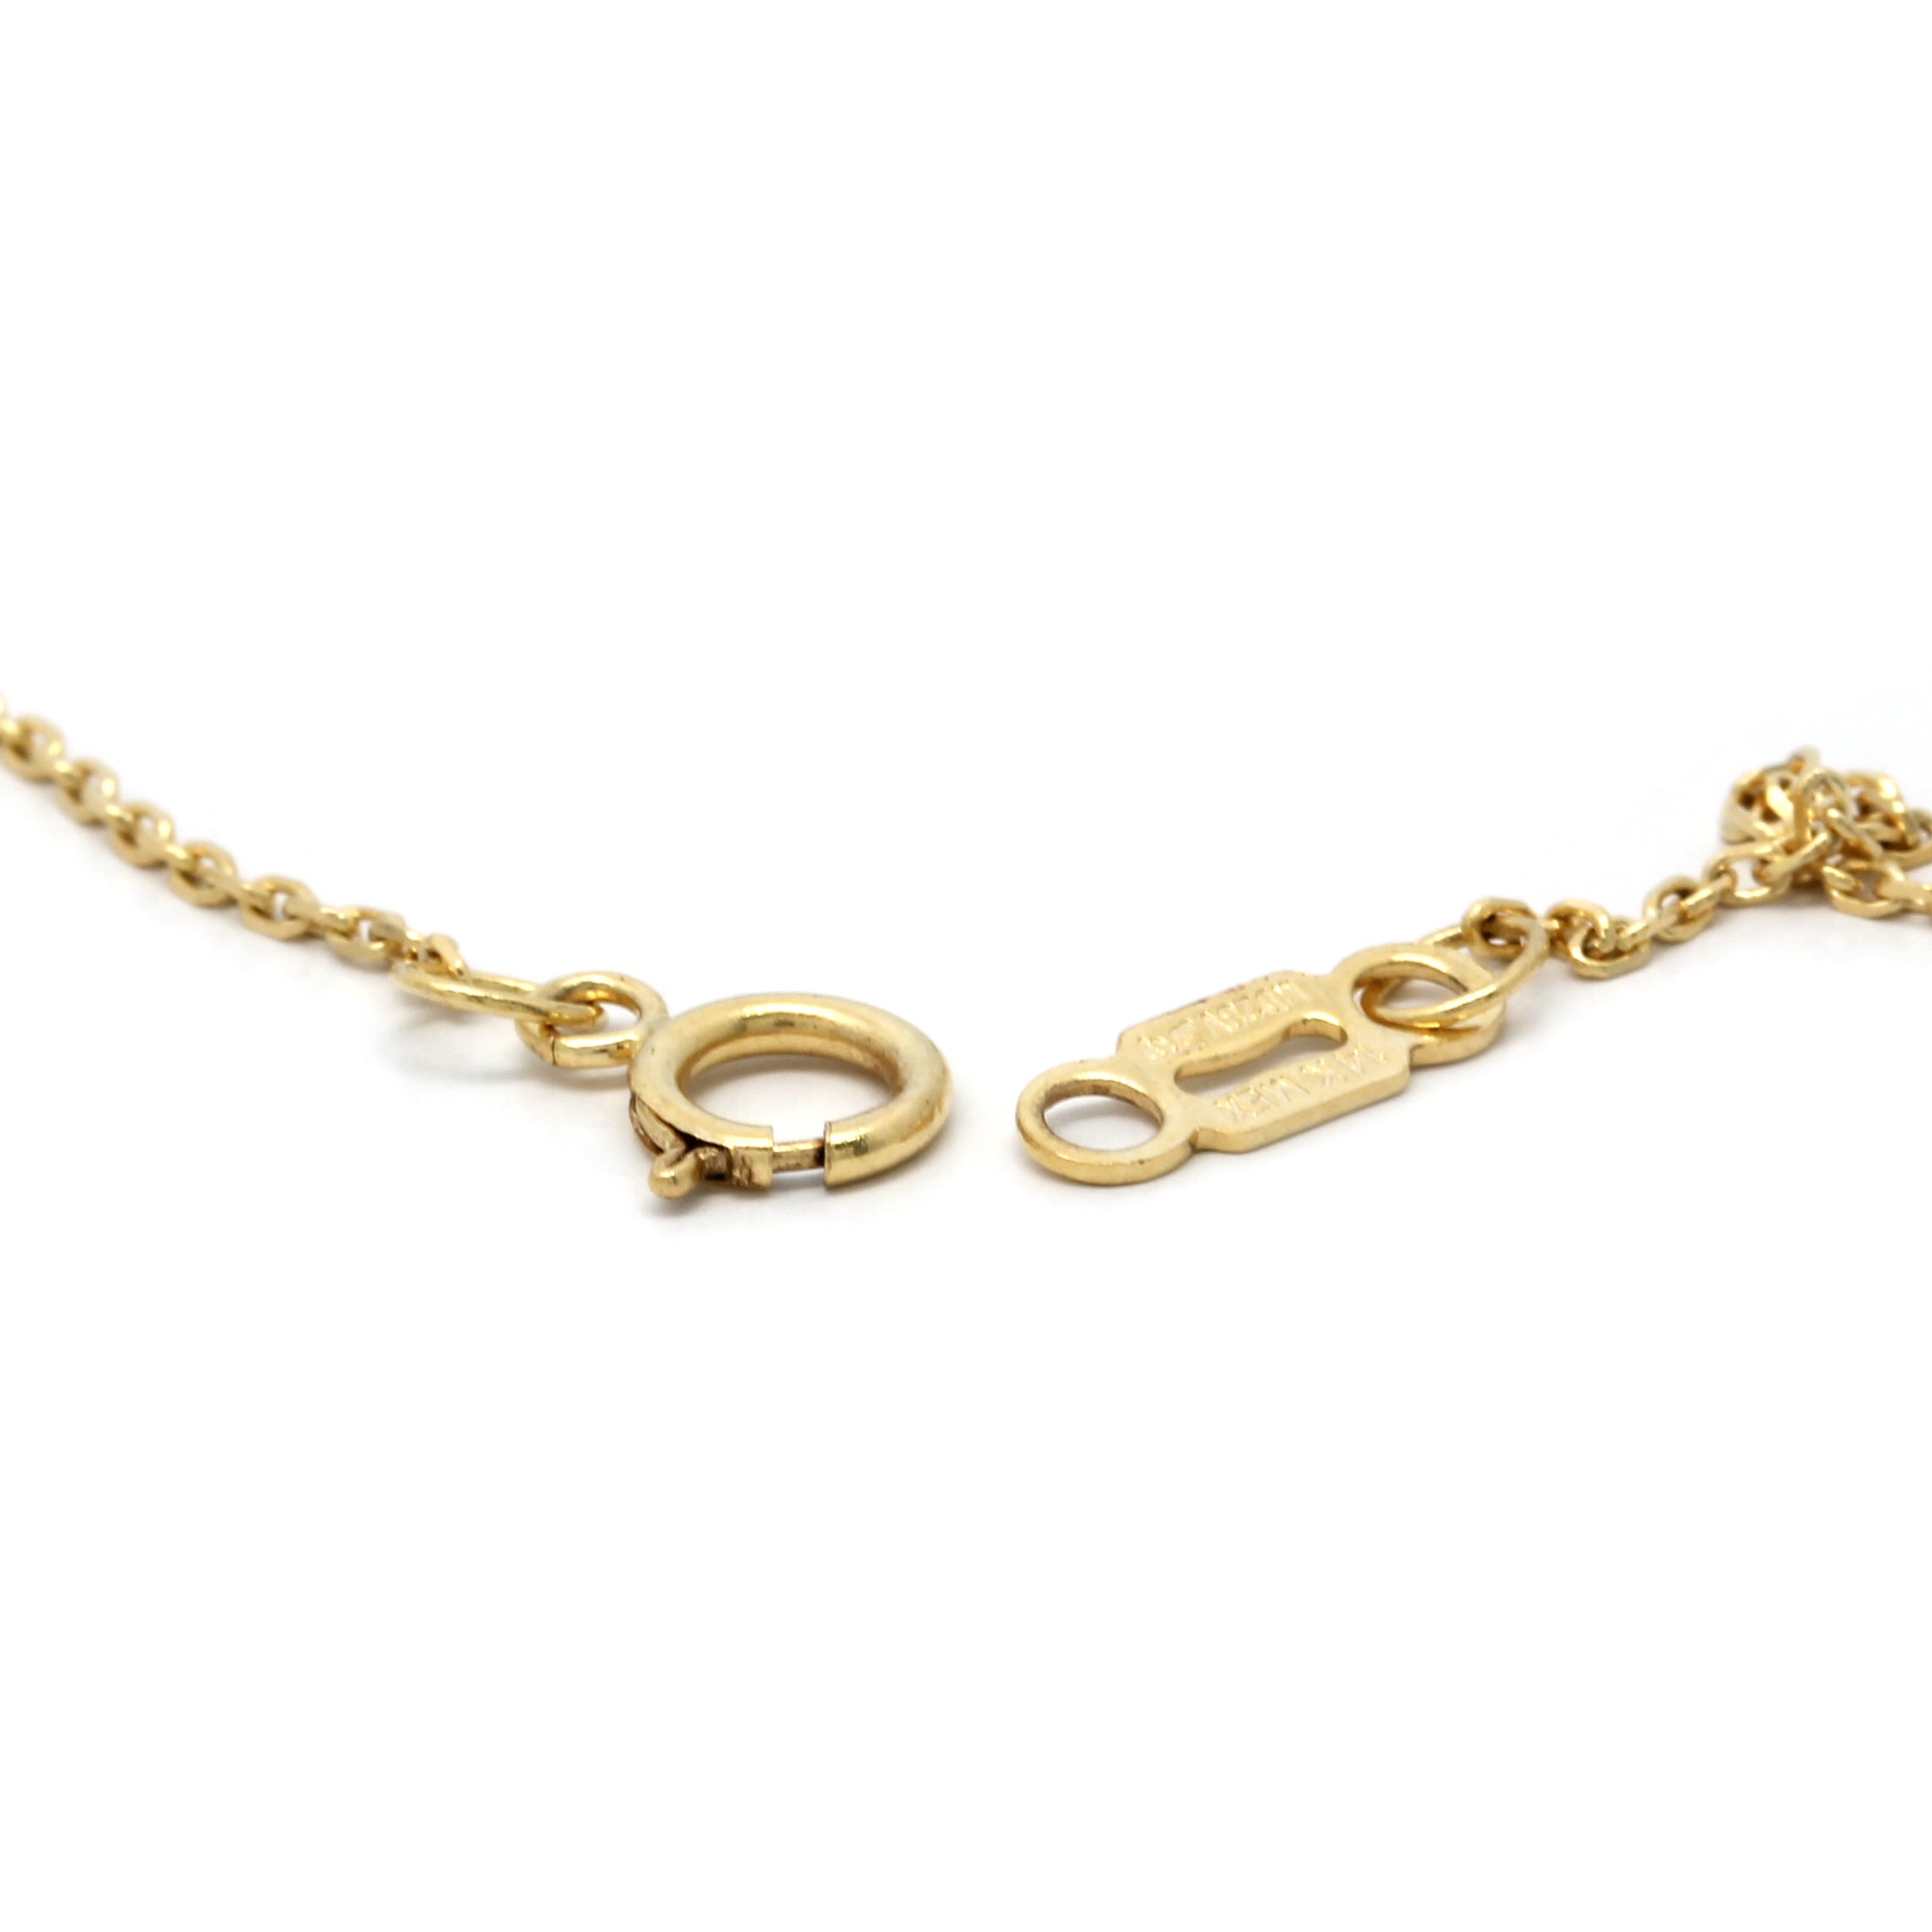 "Aquarius (Jan 20th - Feb 18th)" 14K Yellow Gold Pendant and Chain with Cortez Keshi Pearls